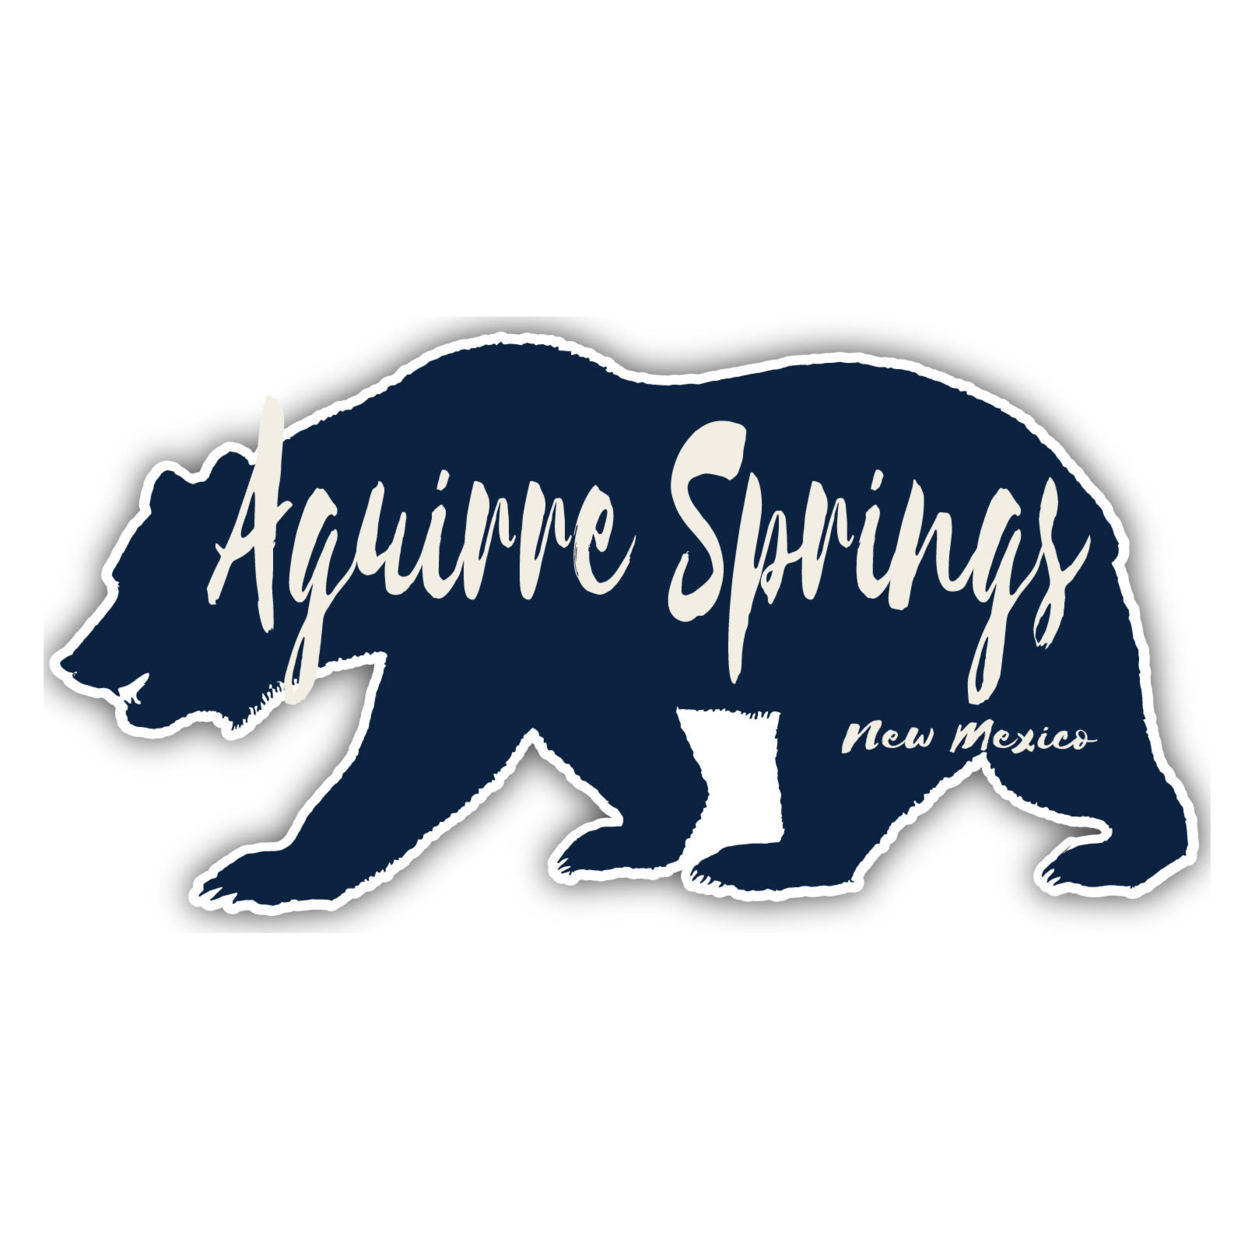 Aguirre Springs New Mexico Souvenir Decorative Stickers (Choose Theme And Size) - 4-Pack, 10-Inch, Bear